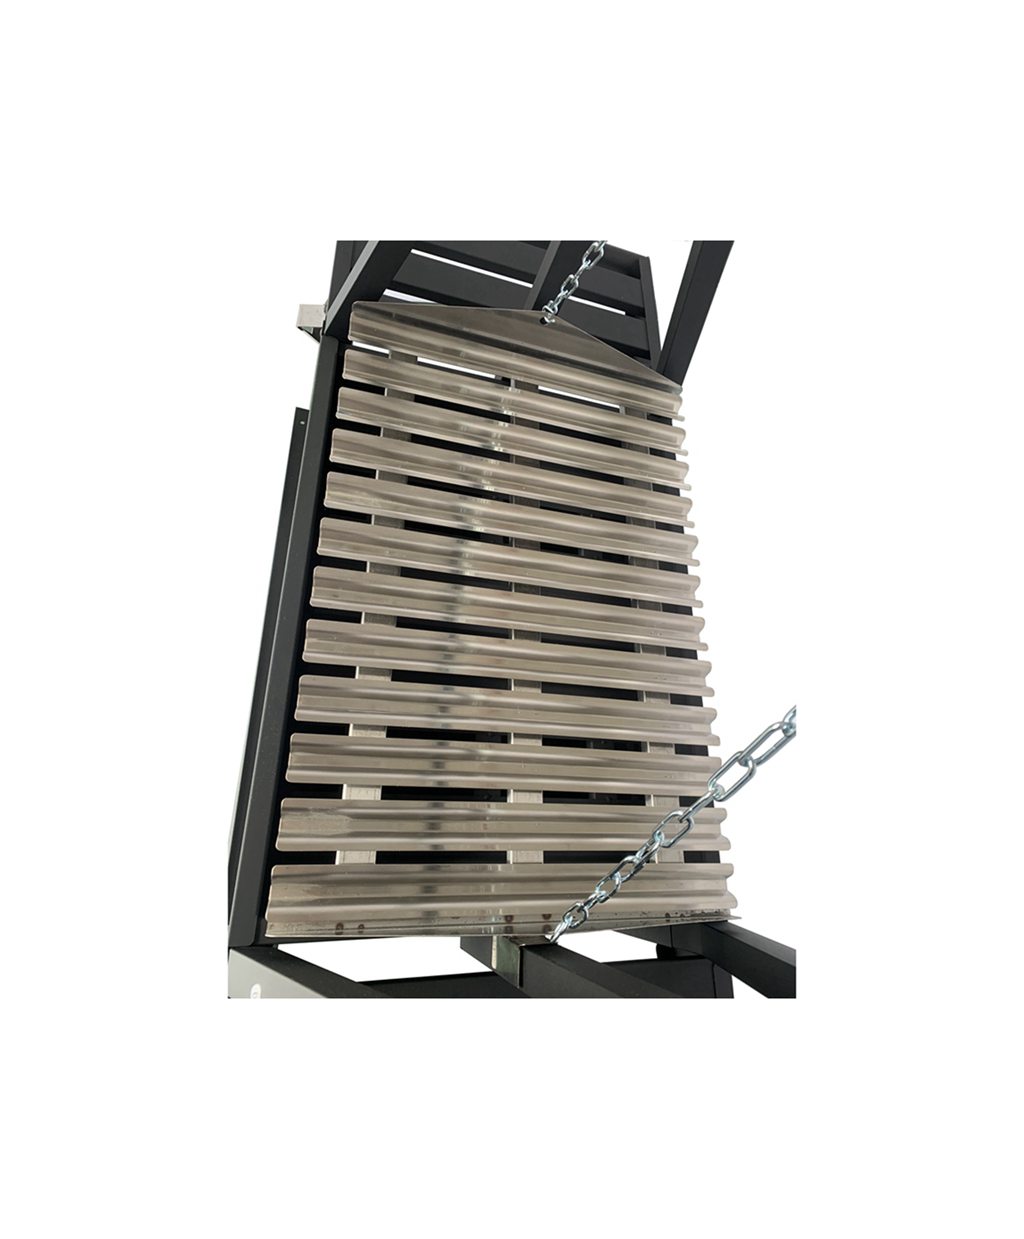 Adjustable Charcoal Grill